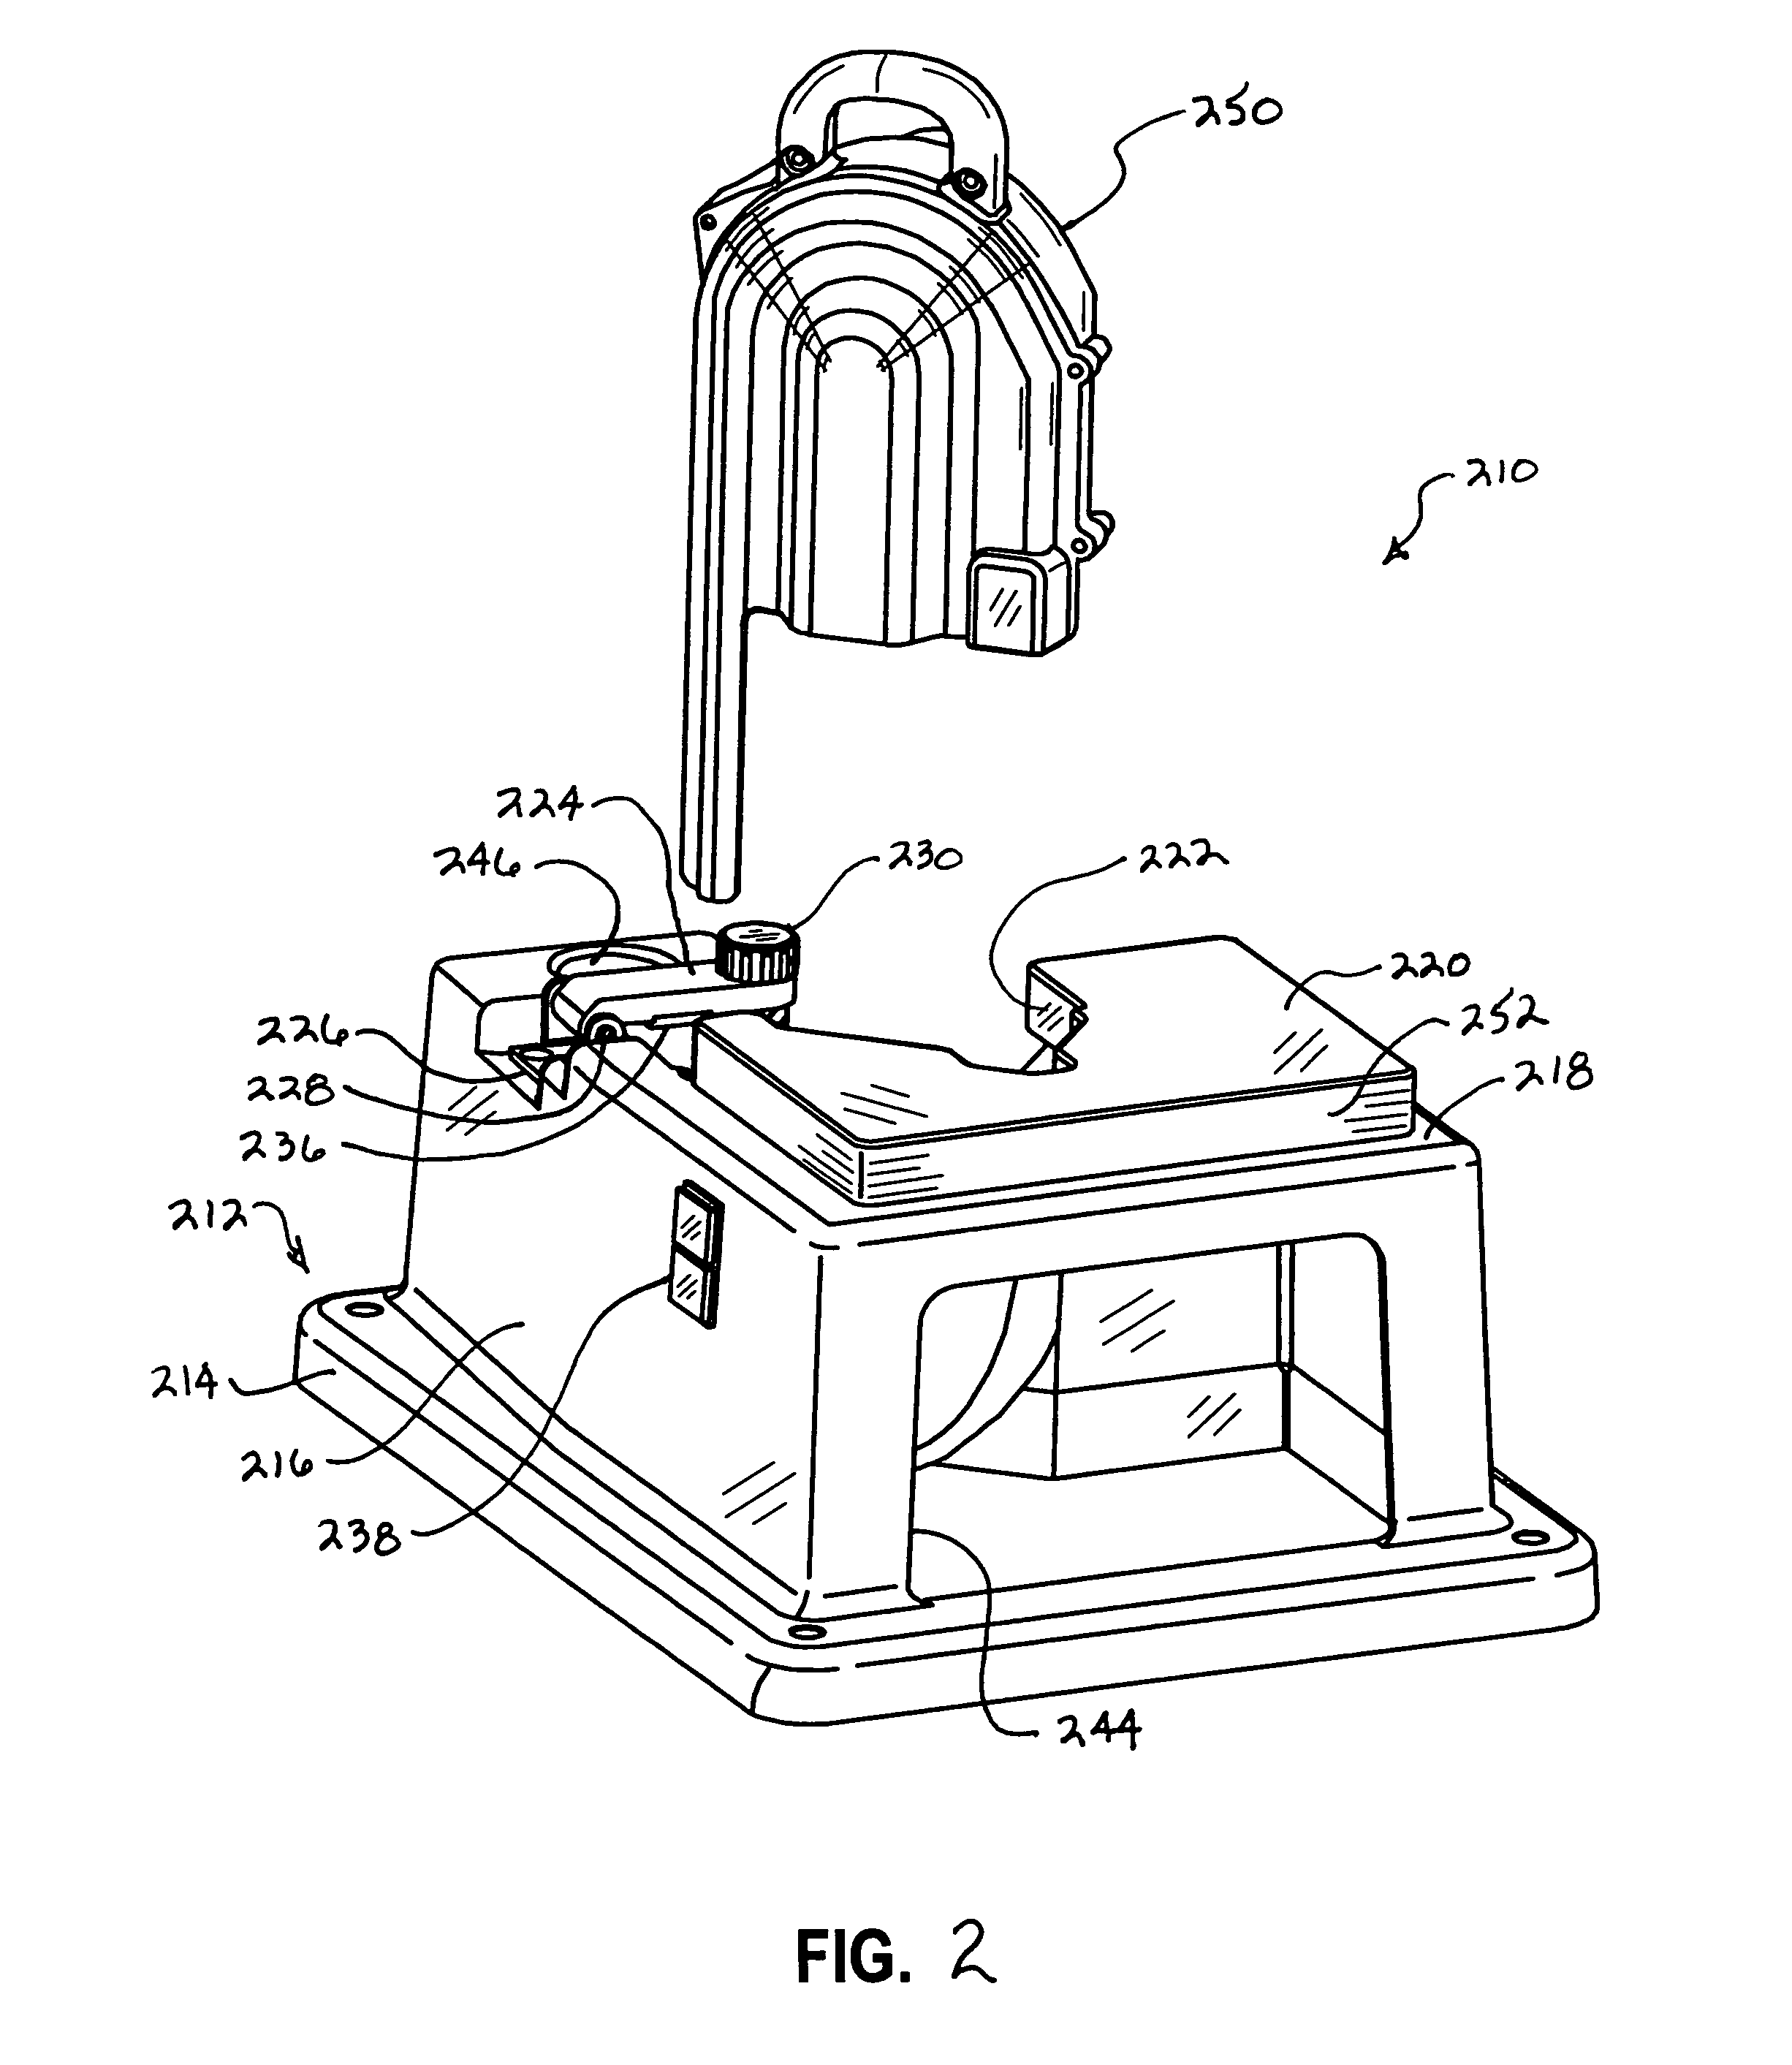 Stand for supporting a hand-held powered operated band saw